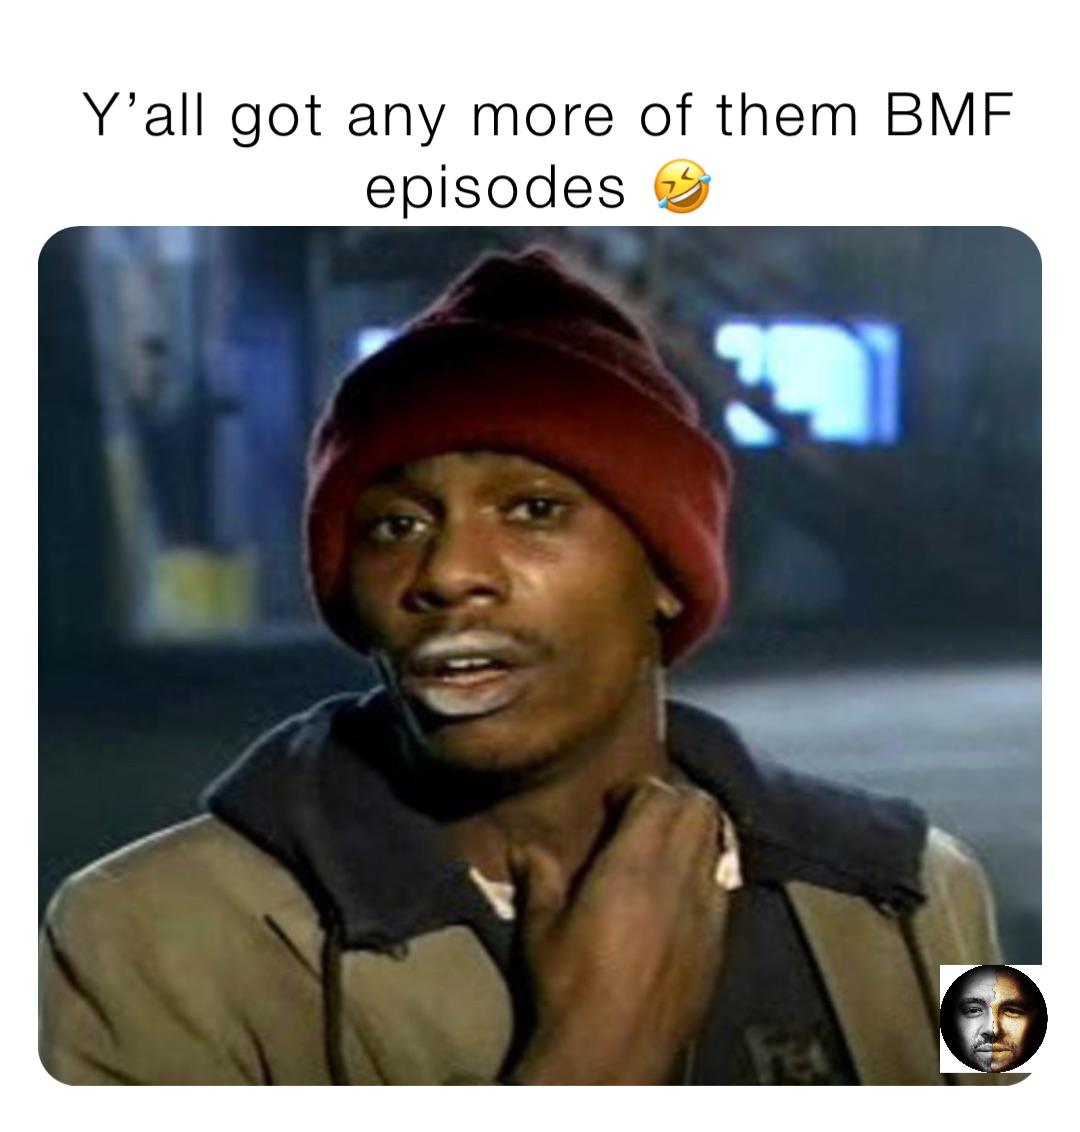 Y’all got any more of them BMF episodes 🤣